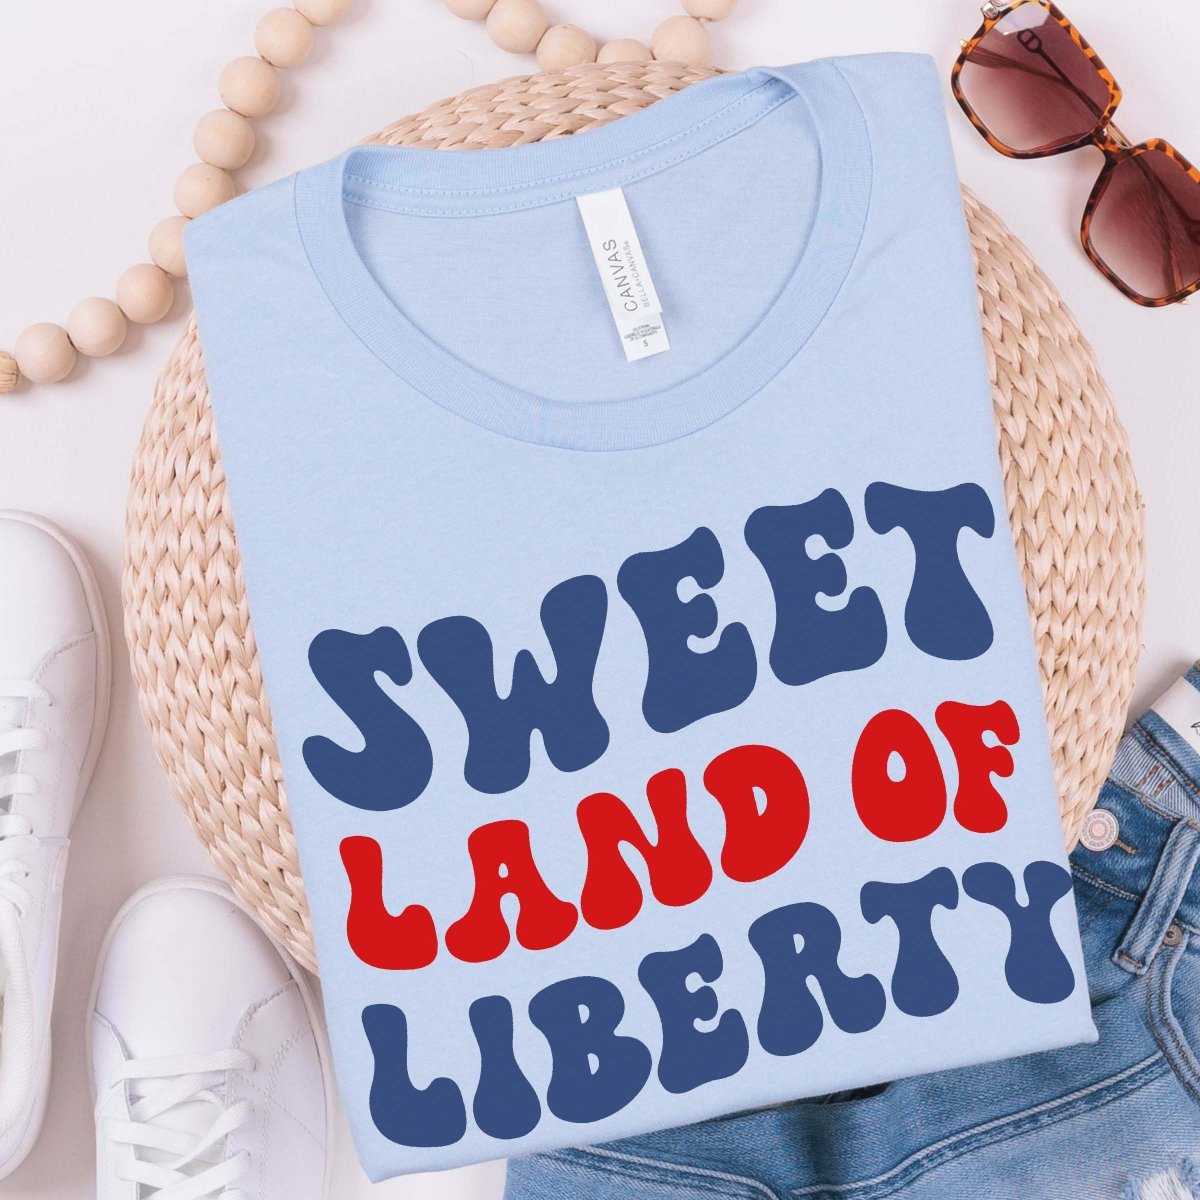 Sweet Land of Liberty Wholesale Tee - Limeberry Designs